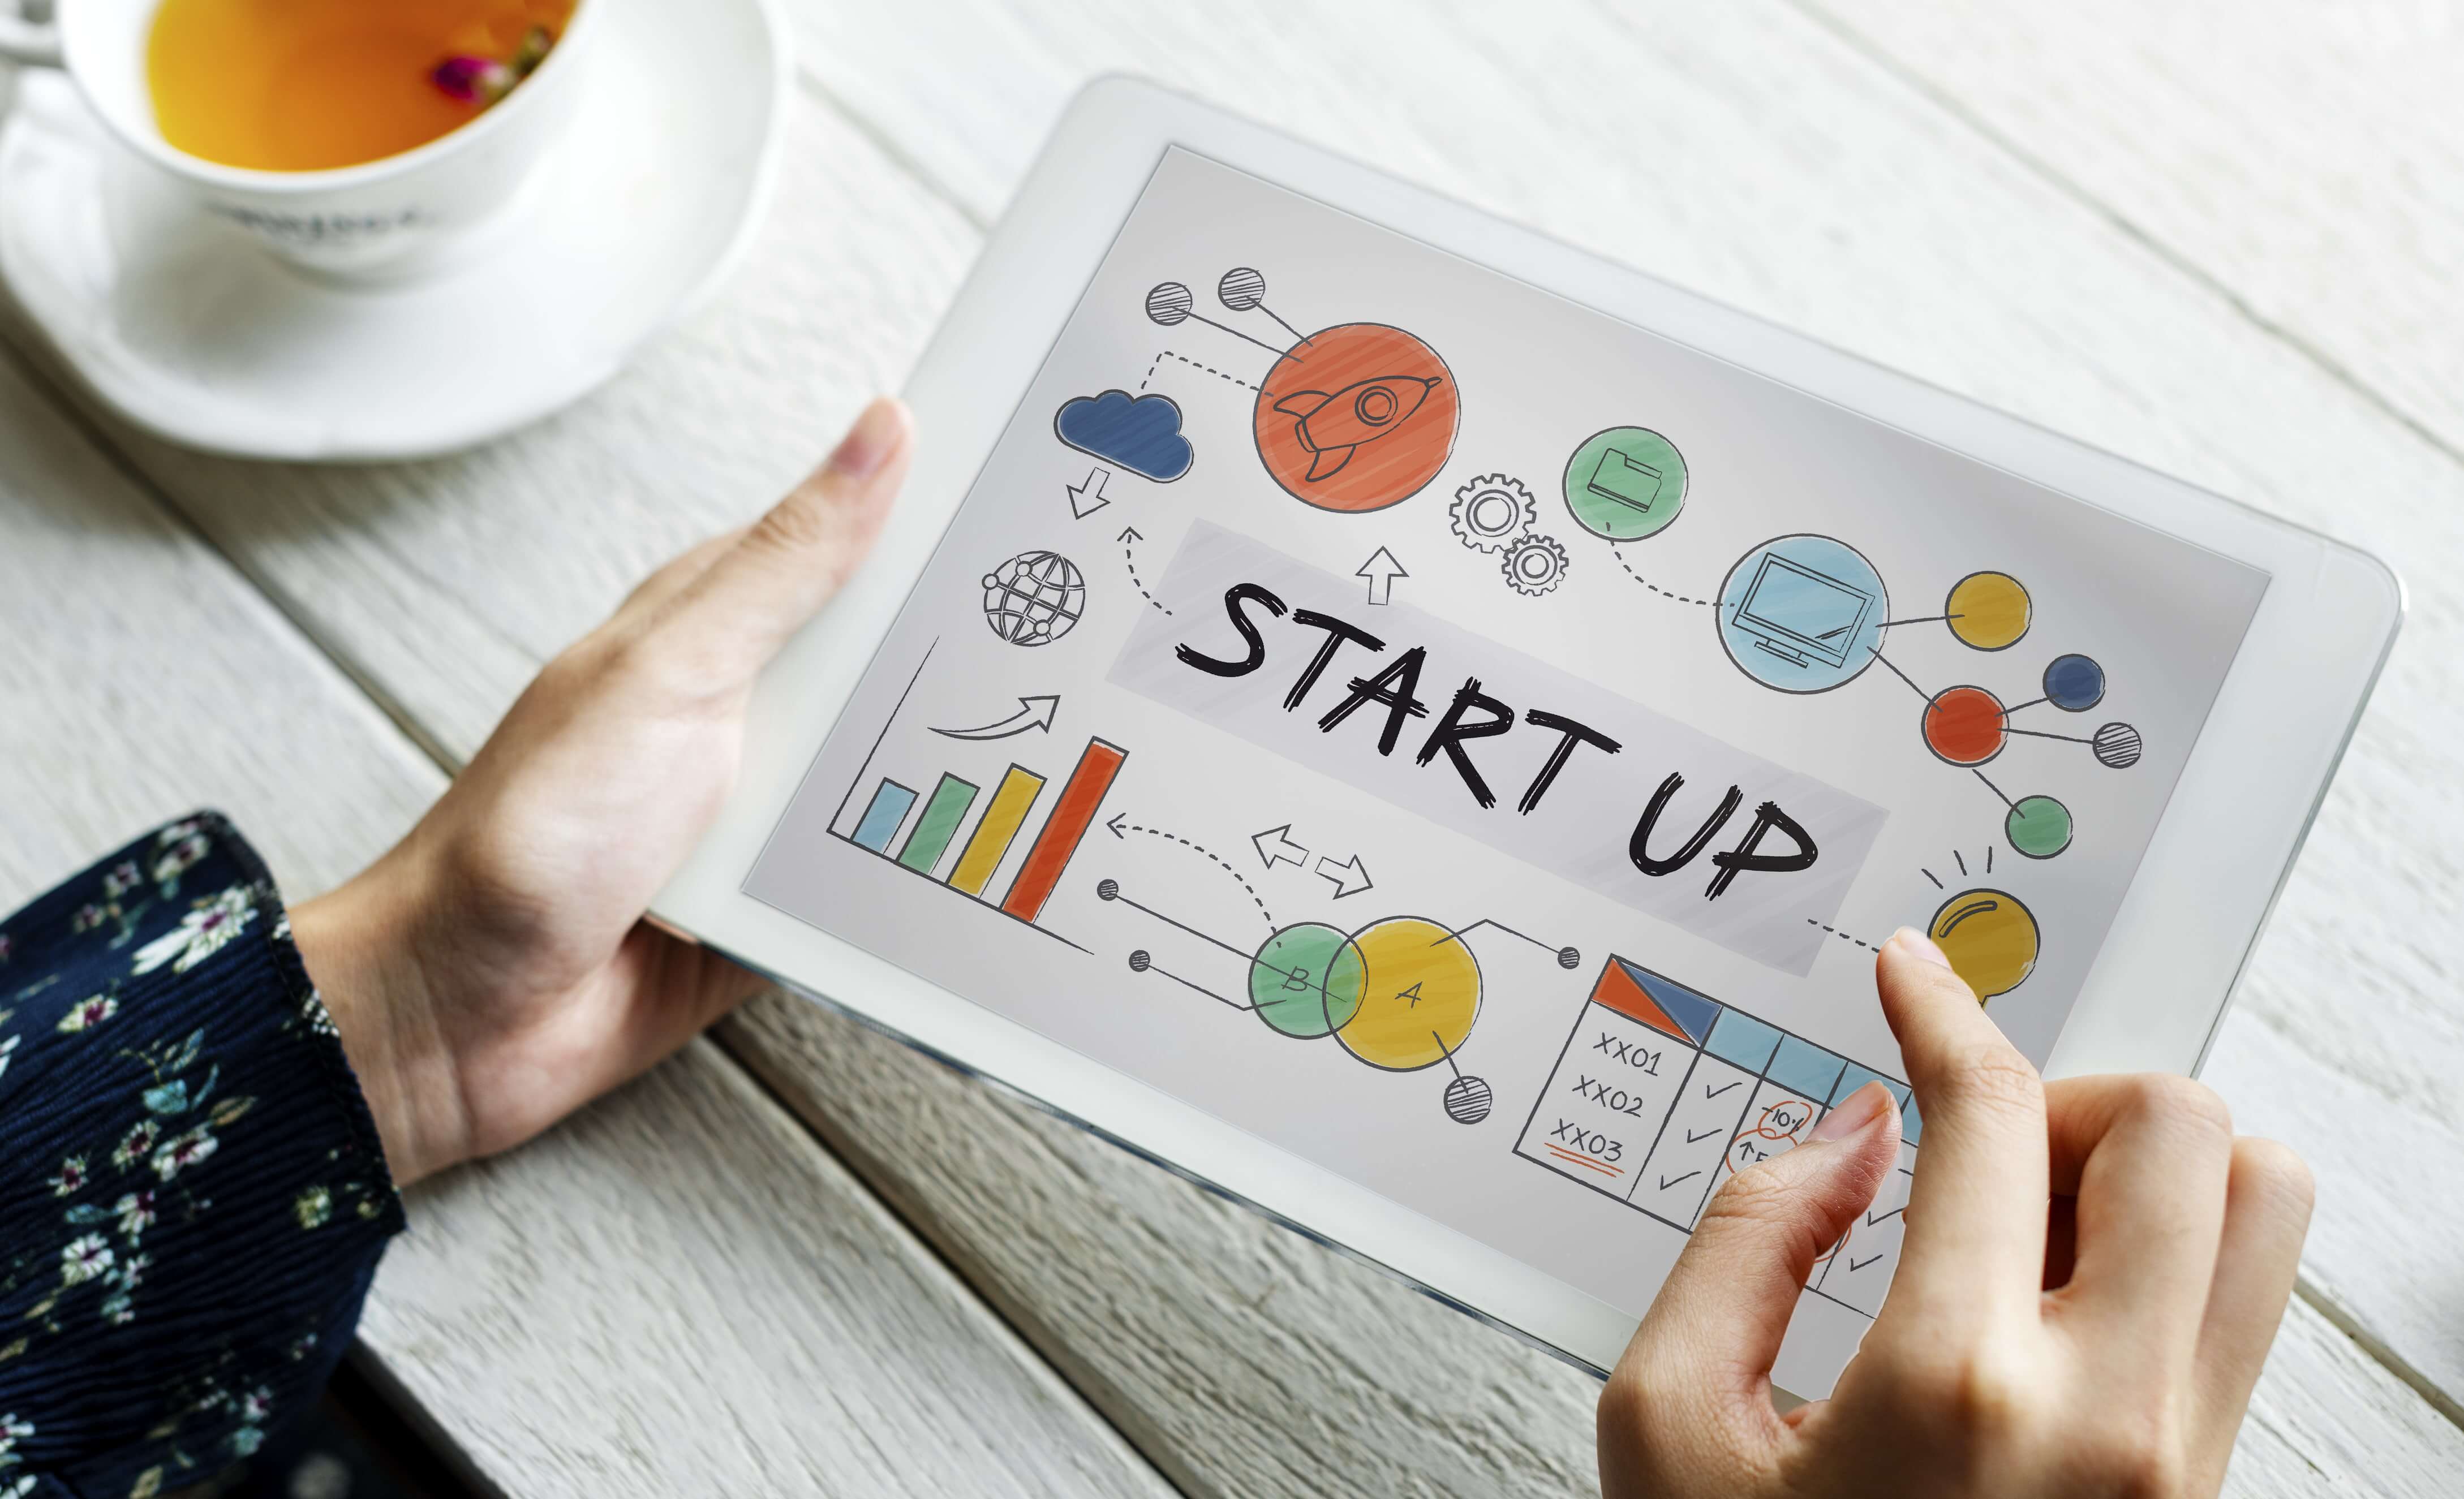 ed-tech-startups-attracted-more-than-2-billion-funding-ivca-pga-labs-report